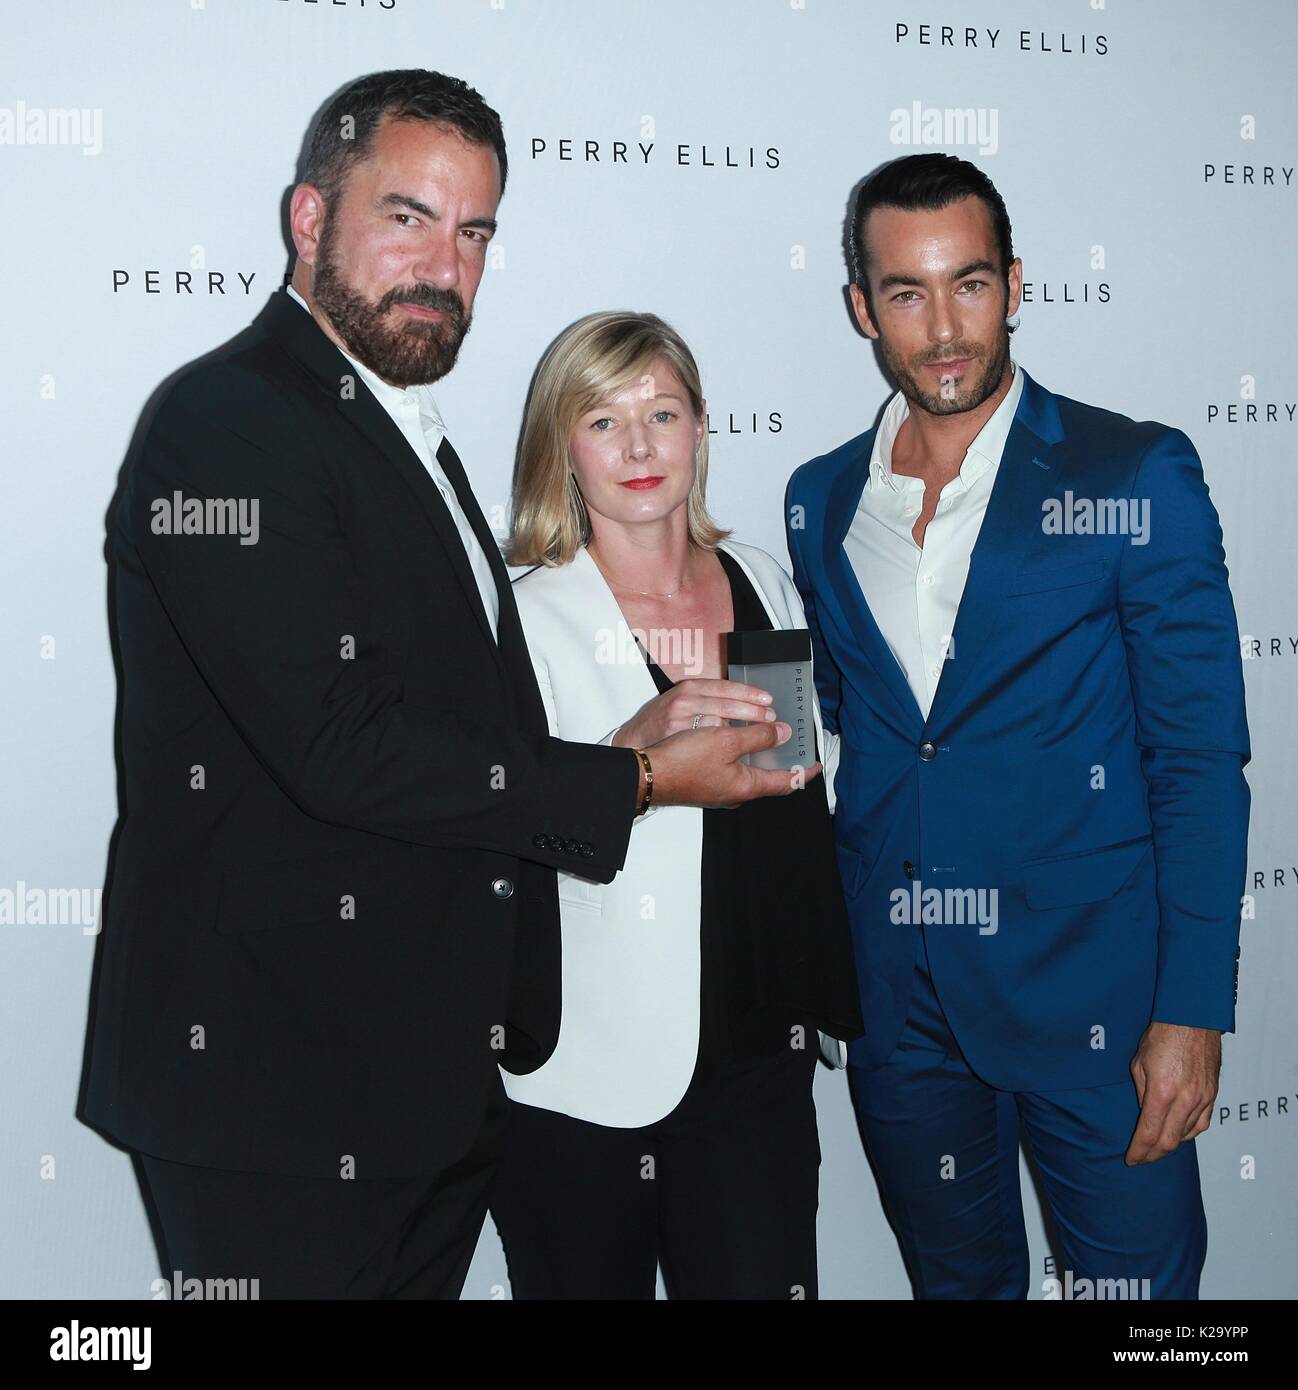 New York, NY, USA. 29th Aug, 2017. Michael Maccari and Aaron Diaz unveil the new Perry Ellis fragrance at Kola House on August 29, 2017 in New York City. Credit: Diego Corredor/Media Punch/Alamy Live News Stock Photo